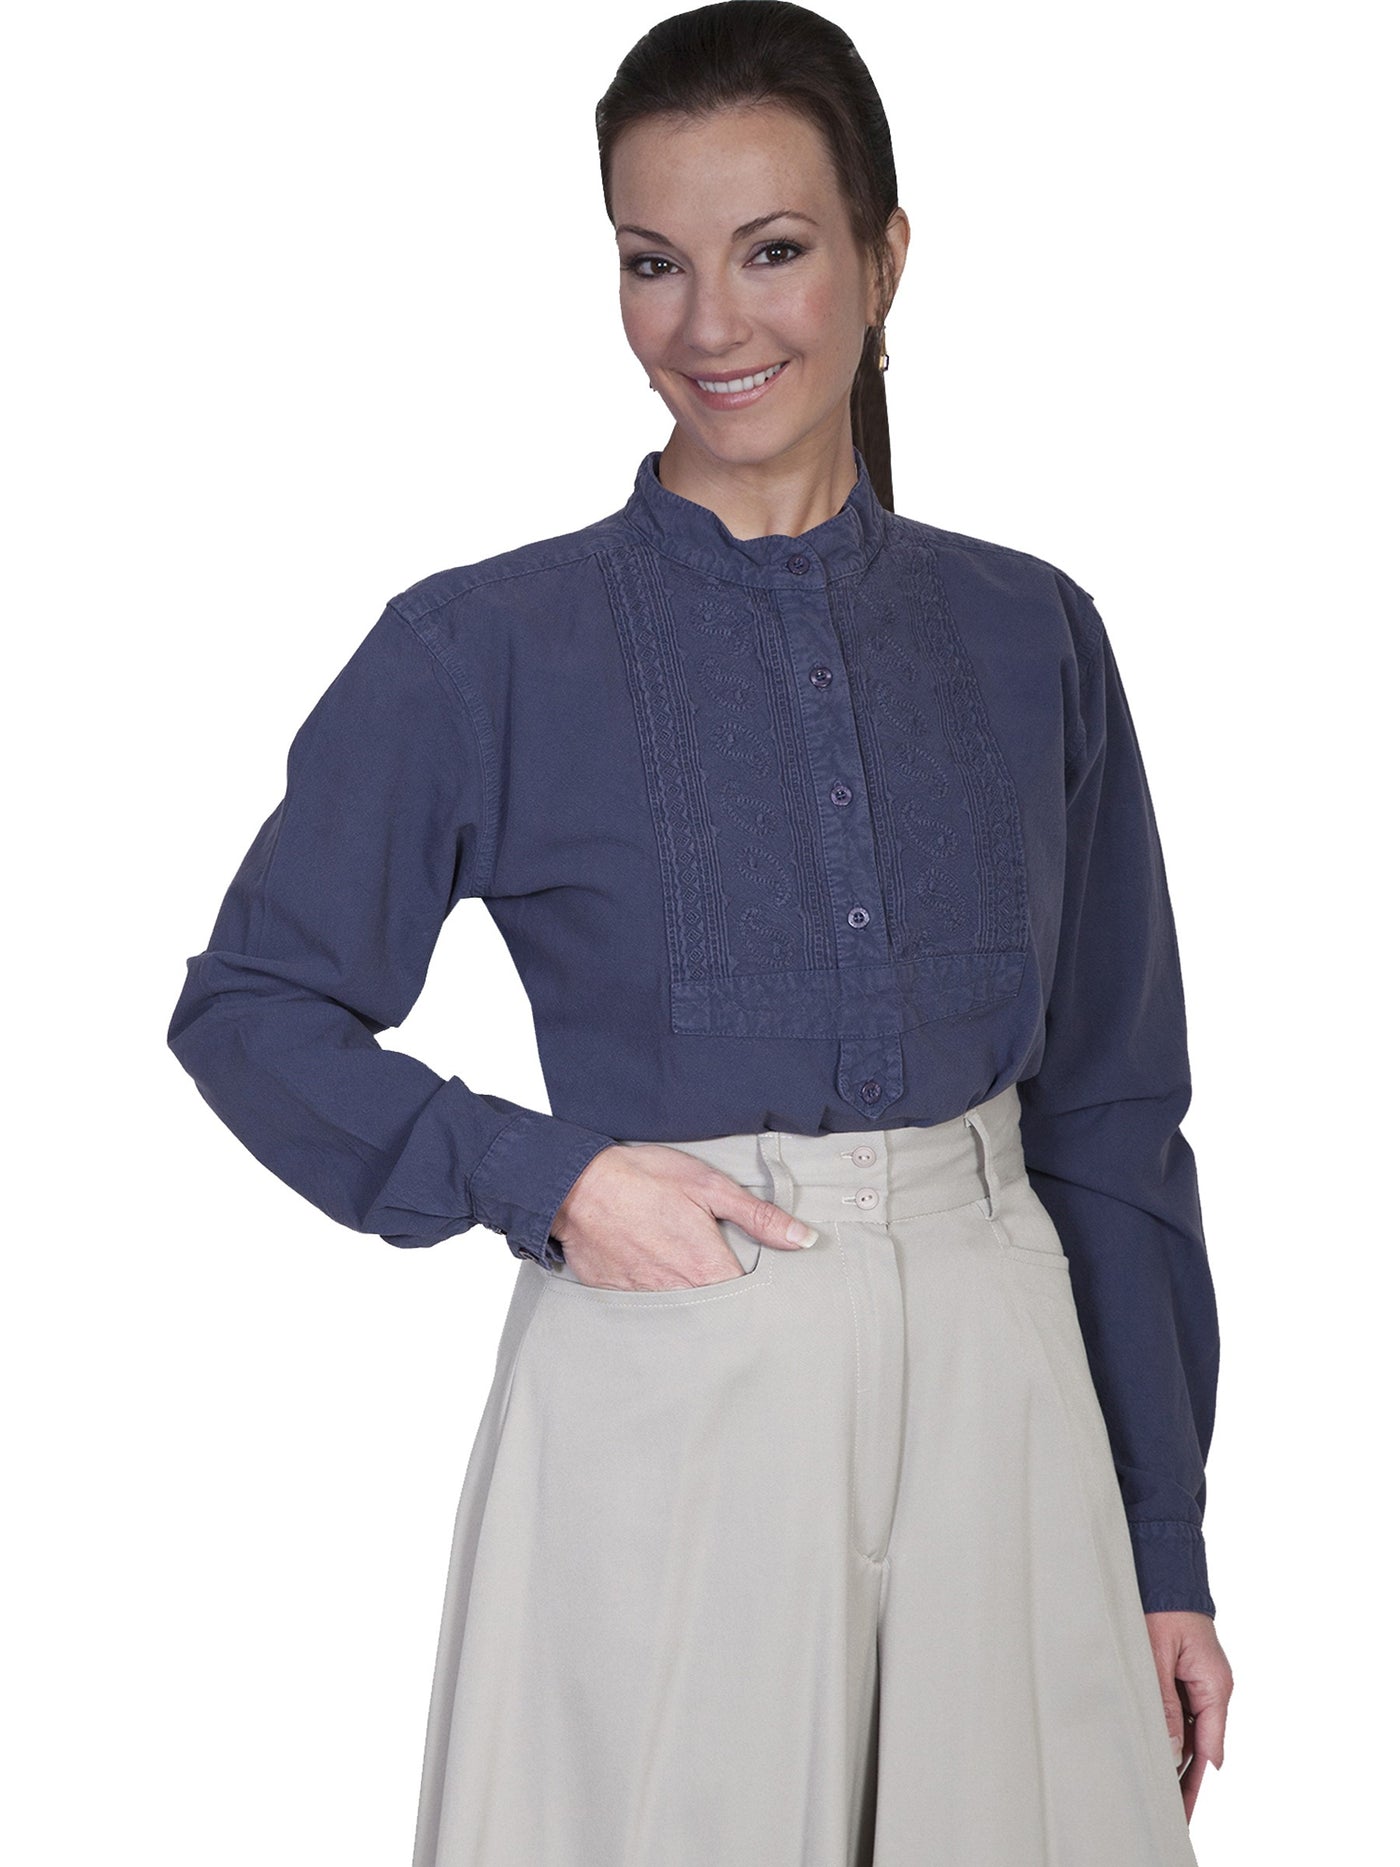 Victorian Style Blouse in Blue - SOLD OUT